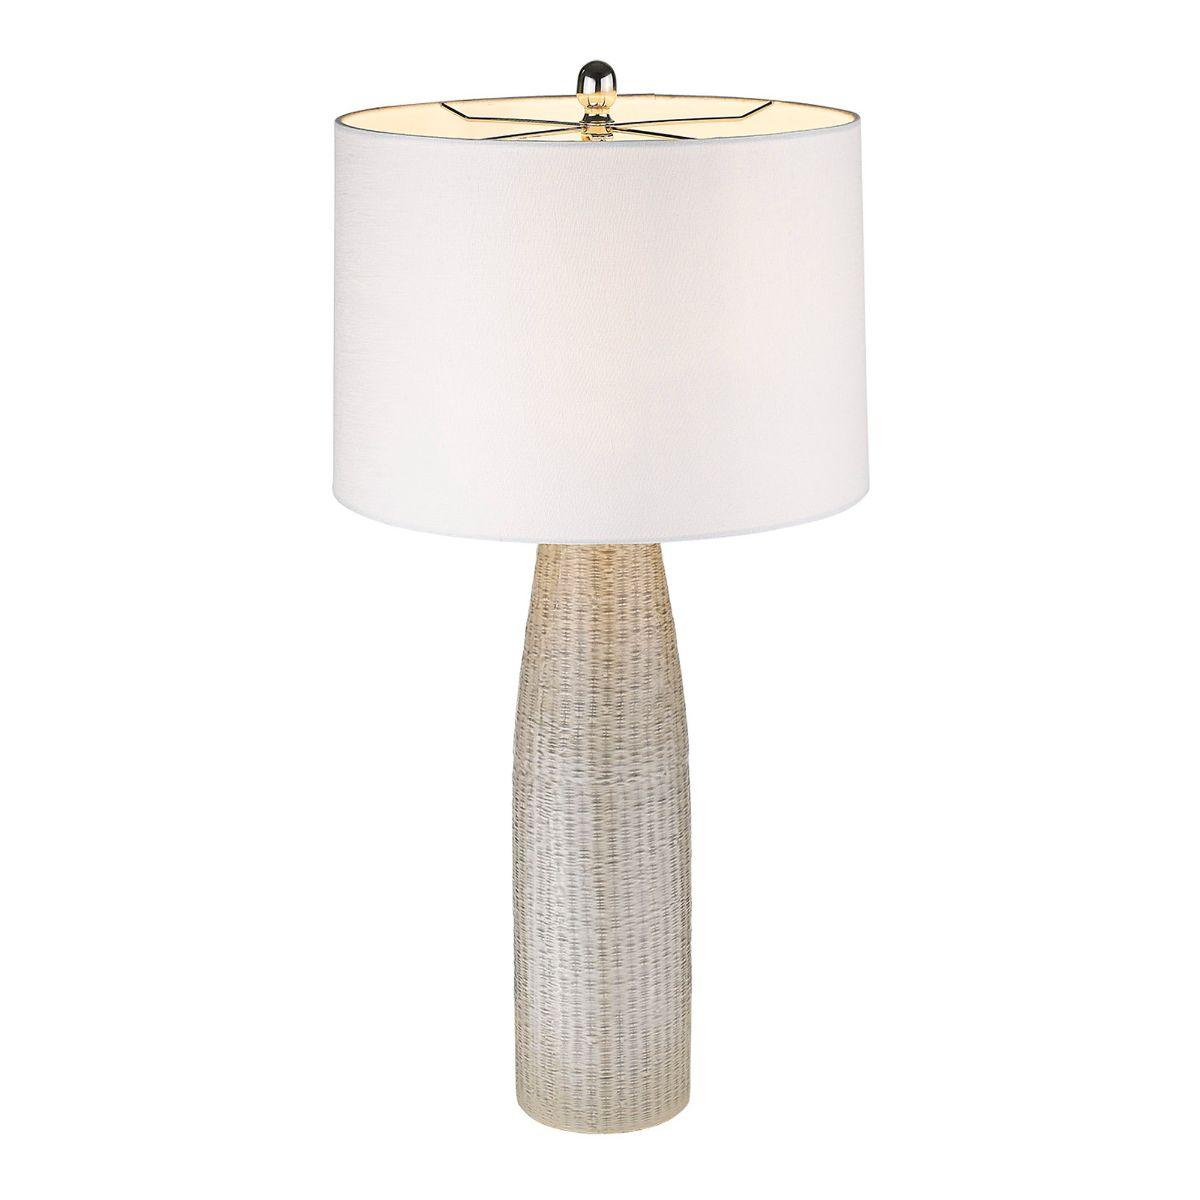 Trend Home 1 Light 33 inches Table Lamp Ceramic Body and Polished Nickel Accents